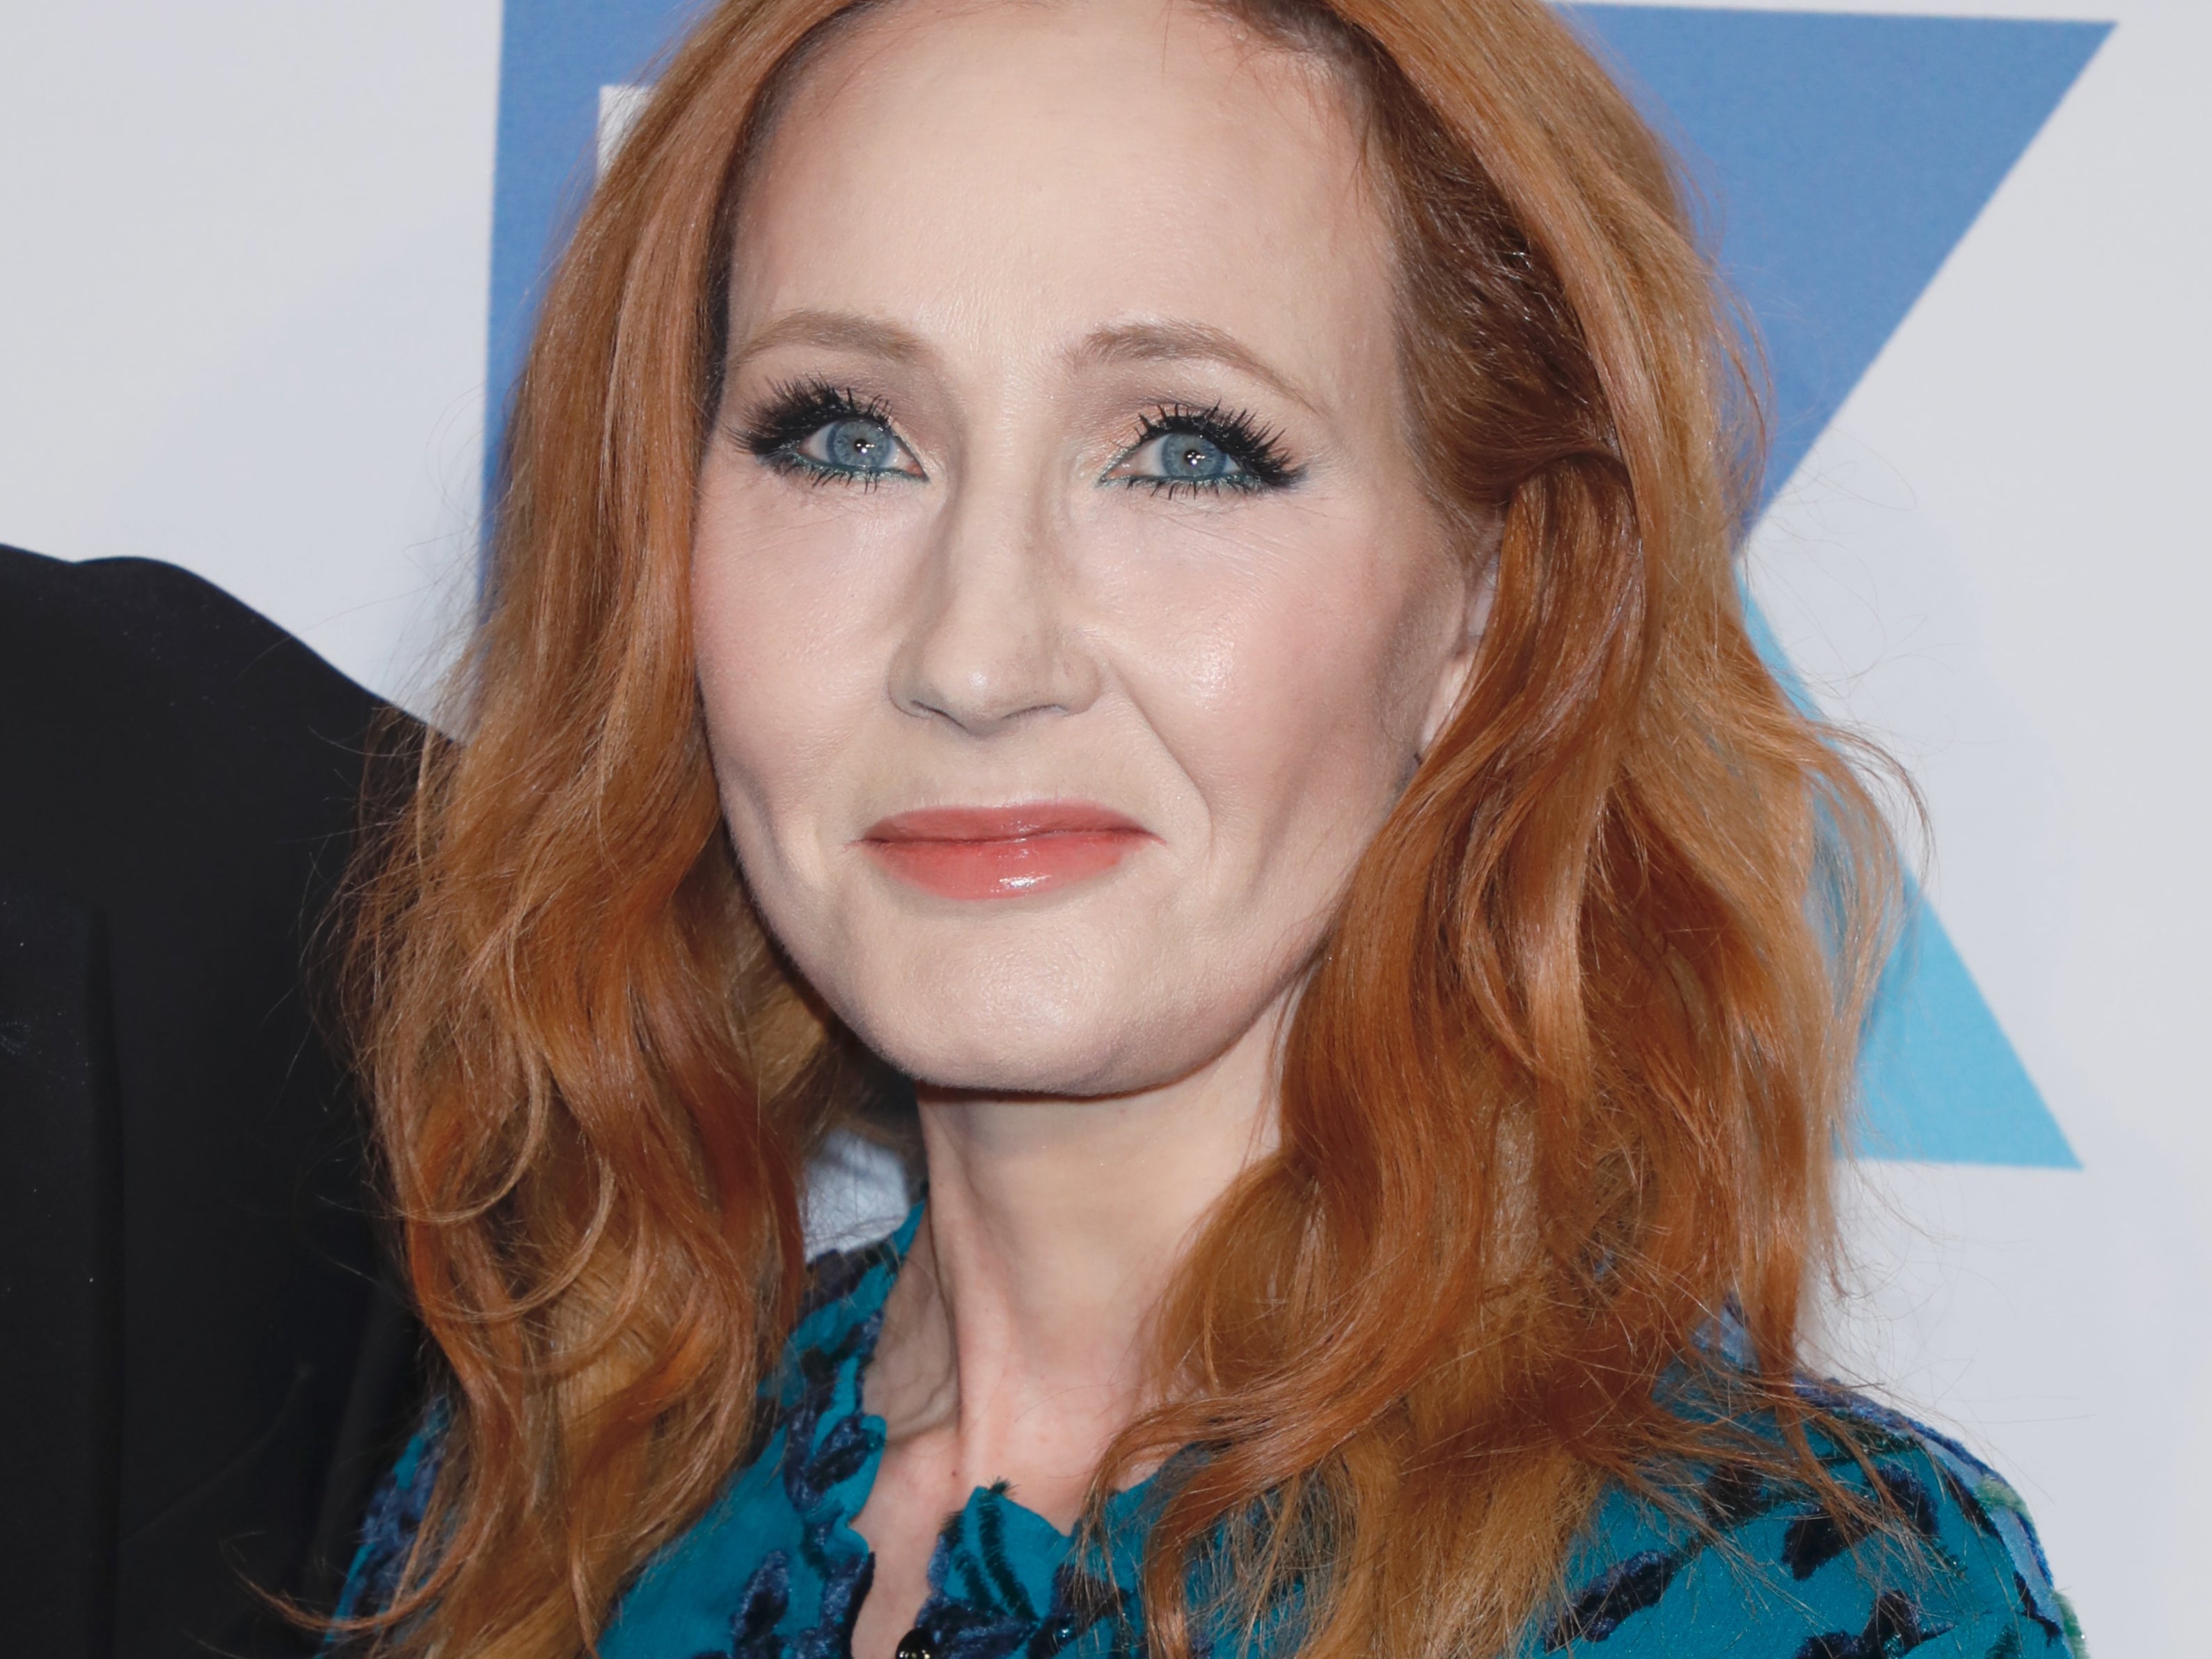 JK Rowling hit out at the proposed amendments to Scotland’s Gender Recognition Reform Bill